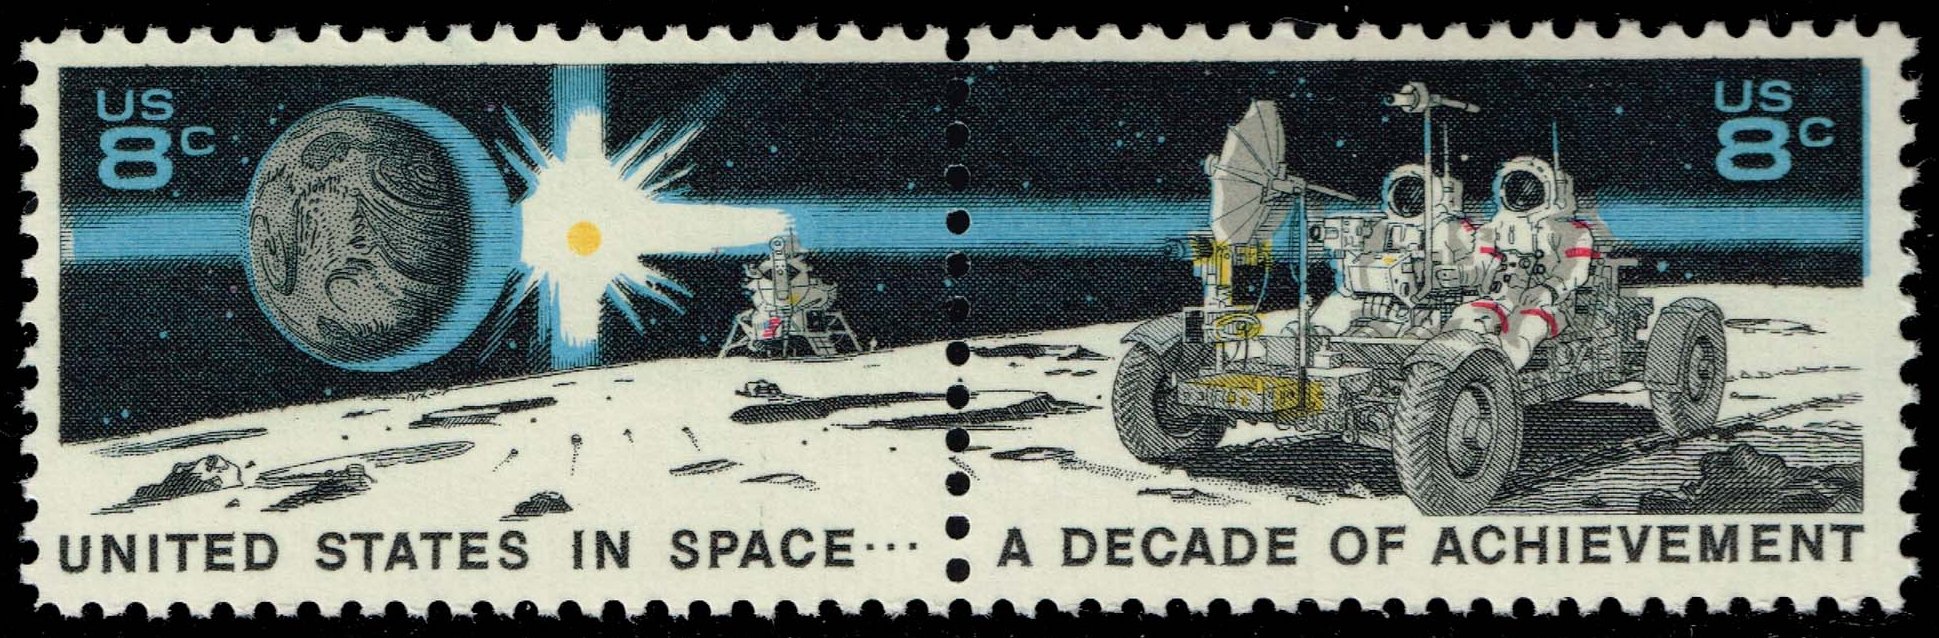 US #1434-1435 (1435b) Space Achievement Decade Pair; MNH - Click Image to Close